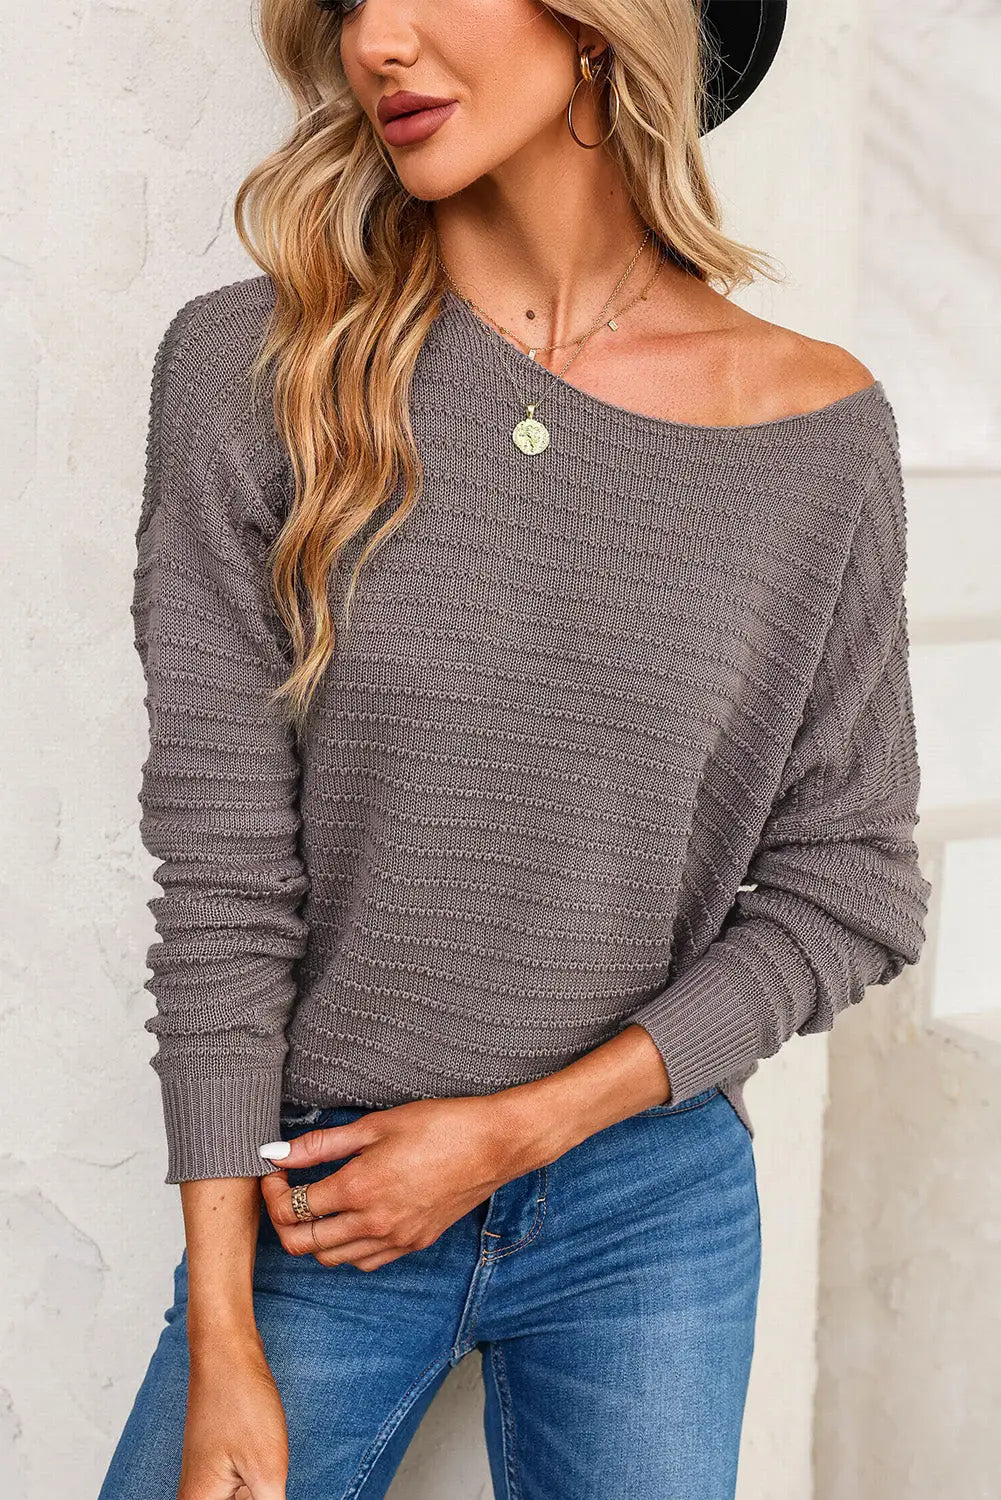 Duffel green textured knit round neck dolman sleeve sweater - gray / l / 55% acrylic + 45% cotton - sweaters & cardigans